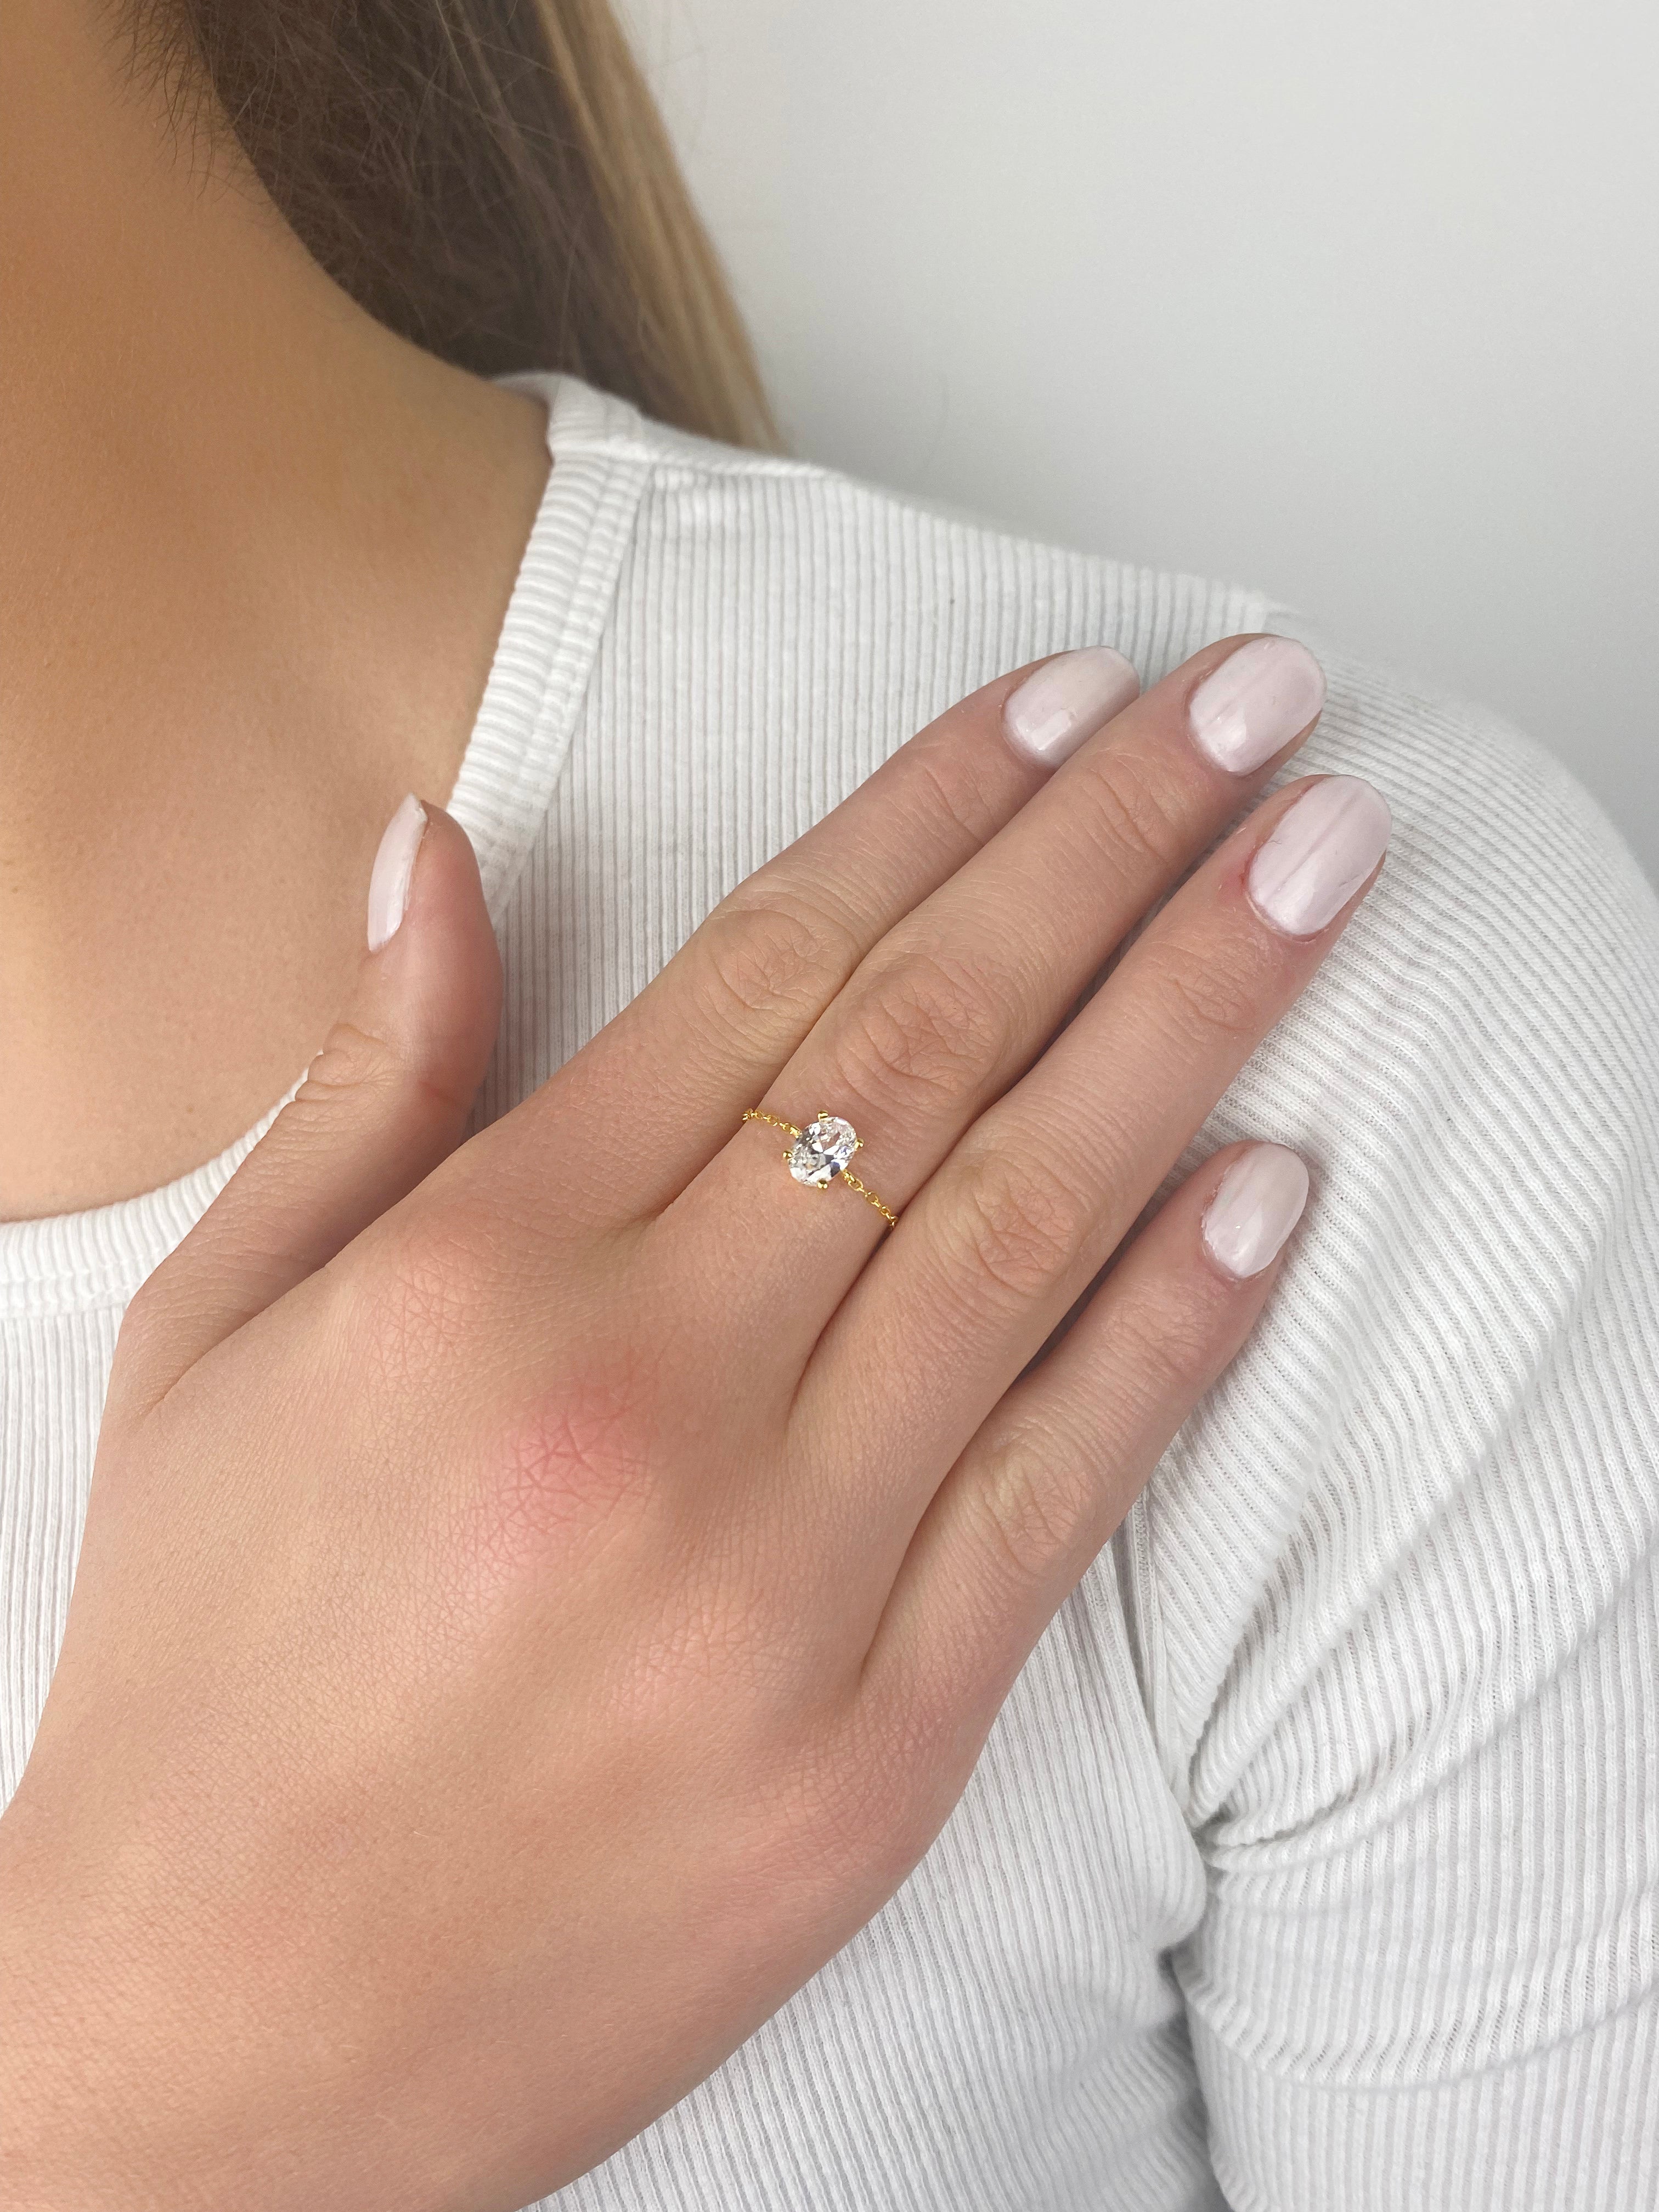 Adjustable Gold Oval Stone Ring